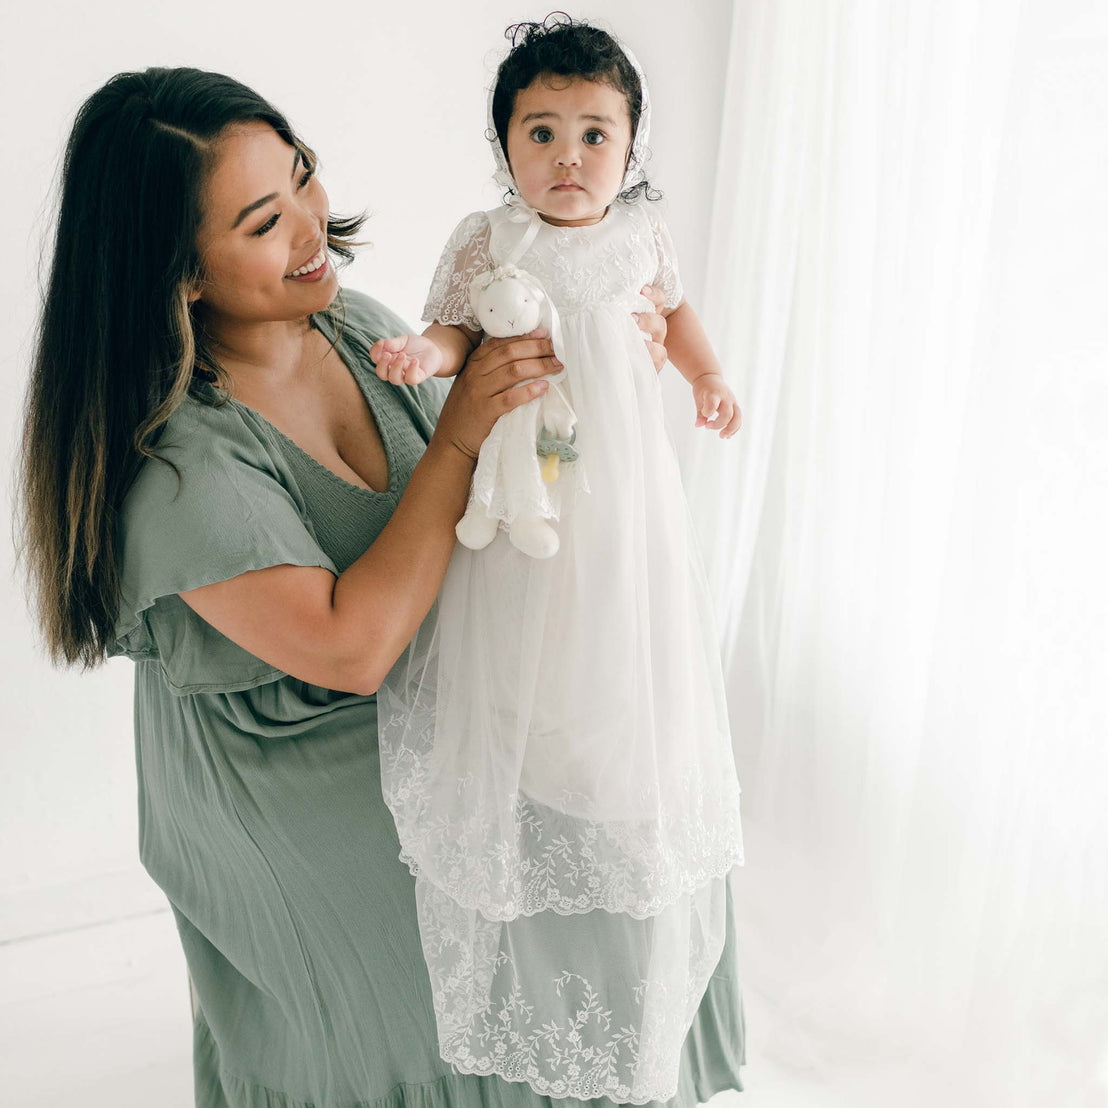 A woman in a green dress smiles while holding her baby girl dressed in the Ella Christening Gown, and a Silly Bunny Buddy. The baby looks at the camera curiously. They are sitting against a soft, white curtain backdrop.